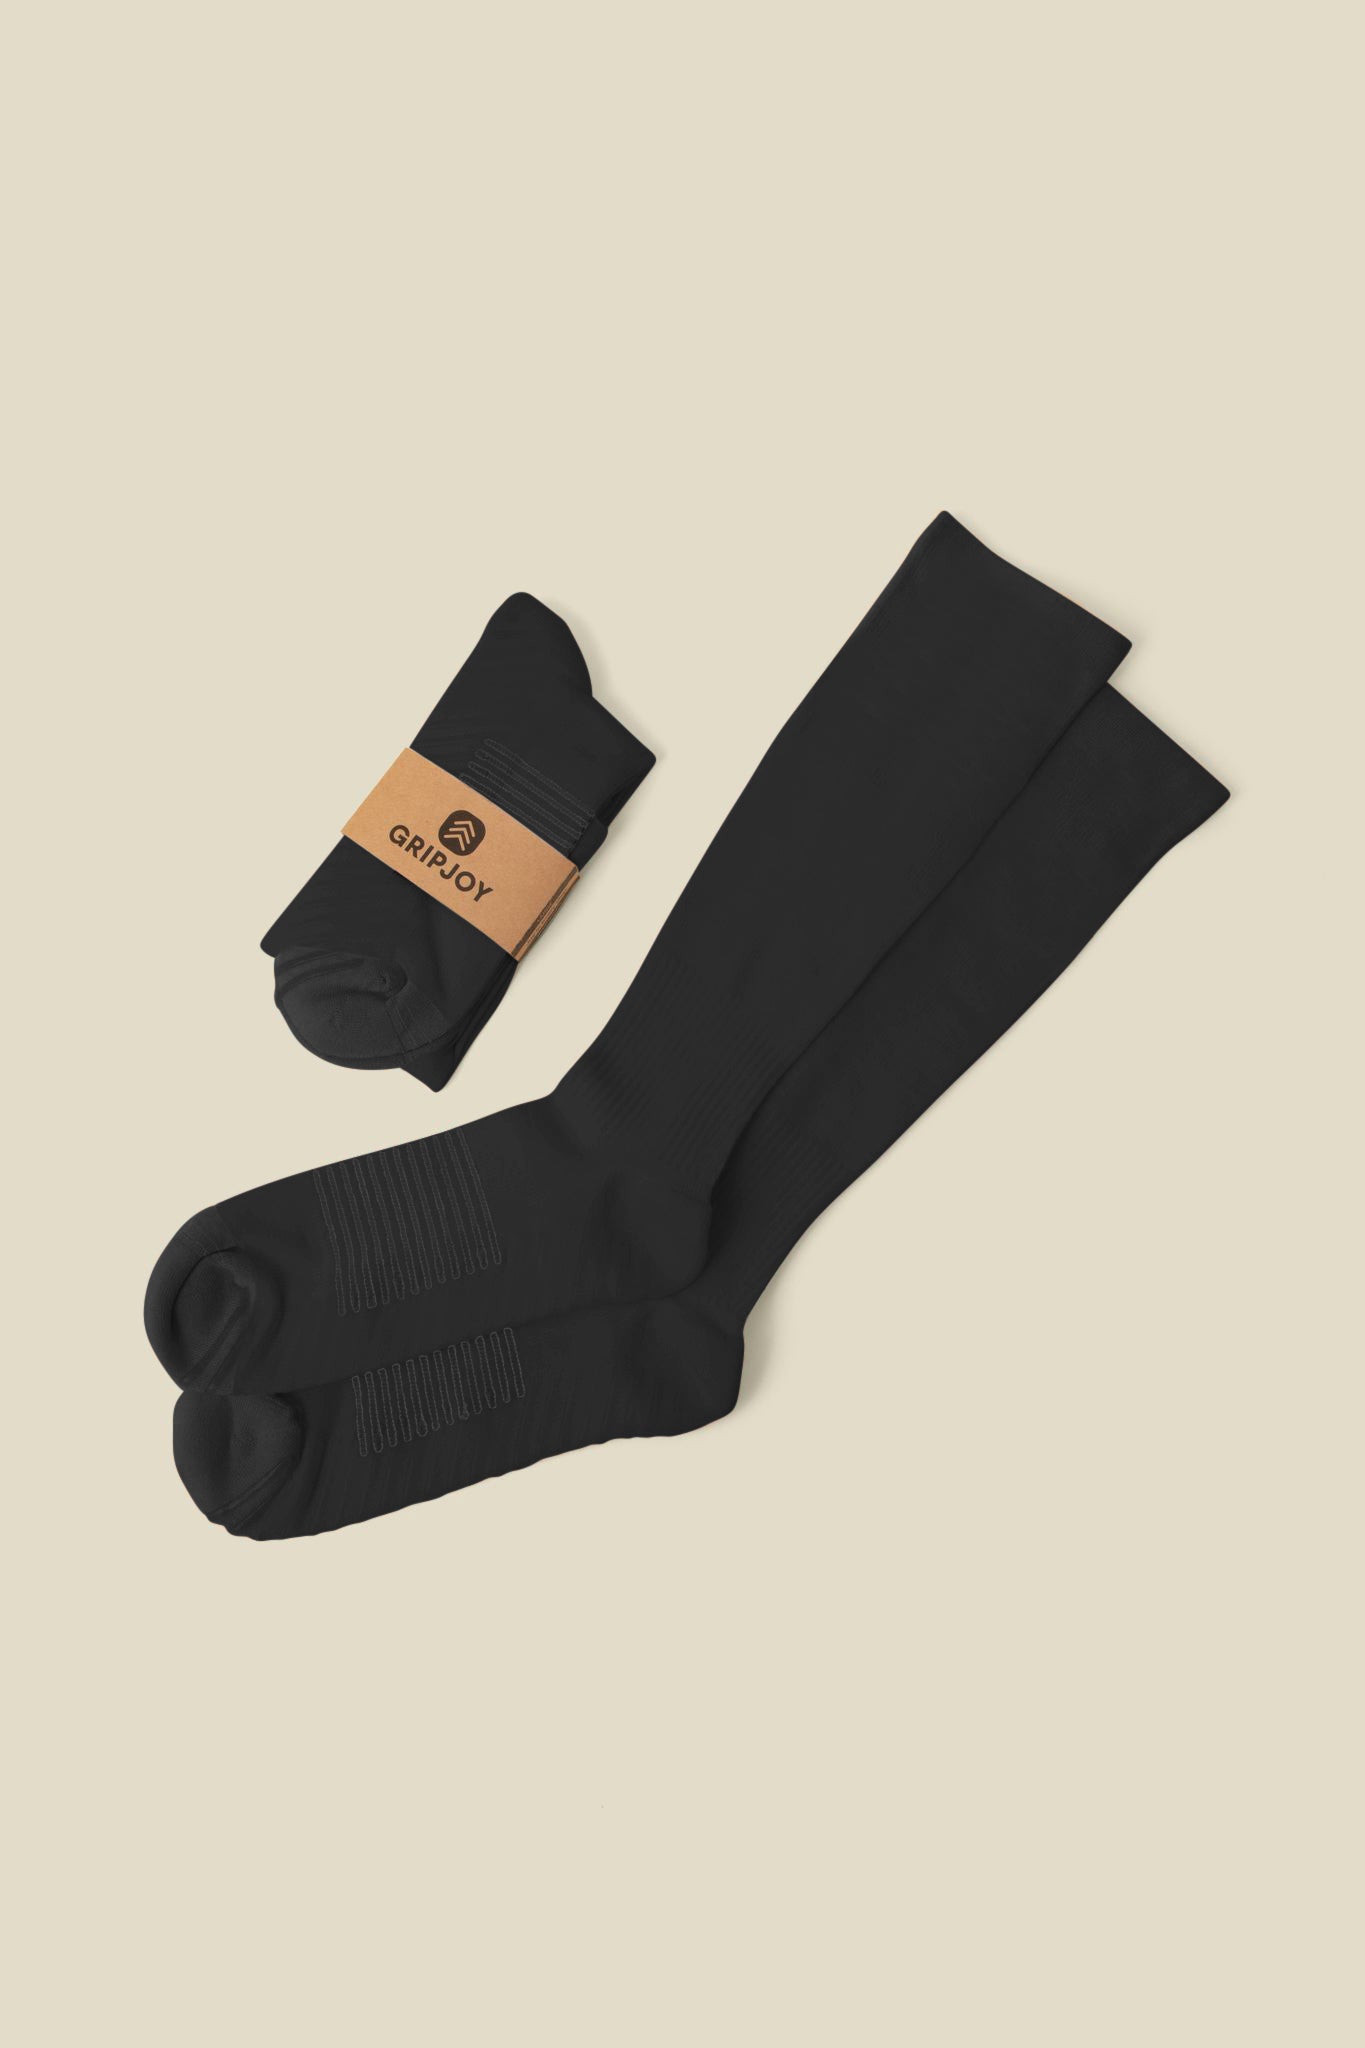 Women's Black Compression Socks with Grips - 2 Pairs - Gripjoy Socks